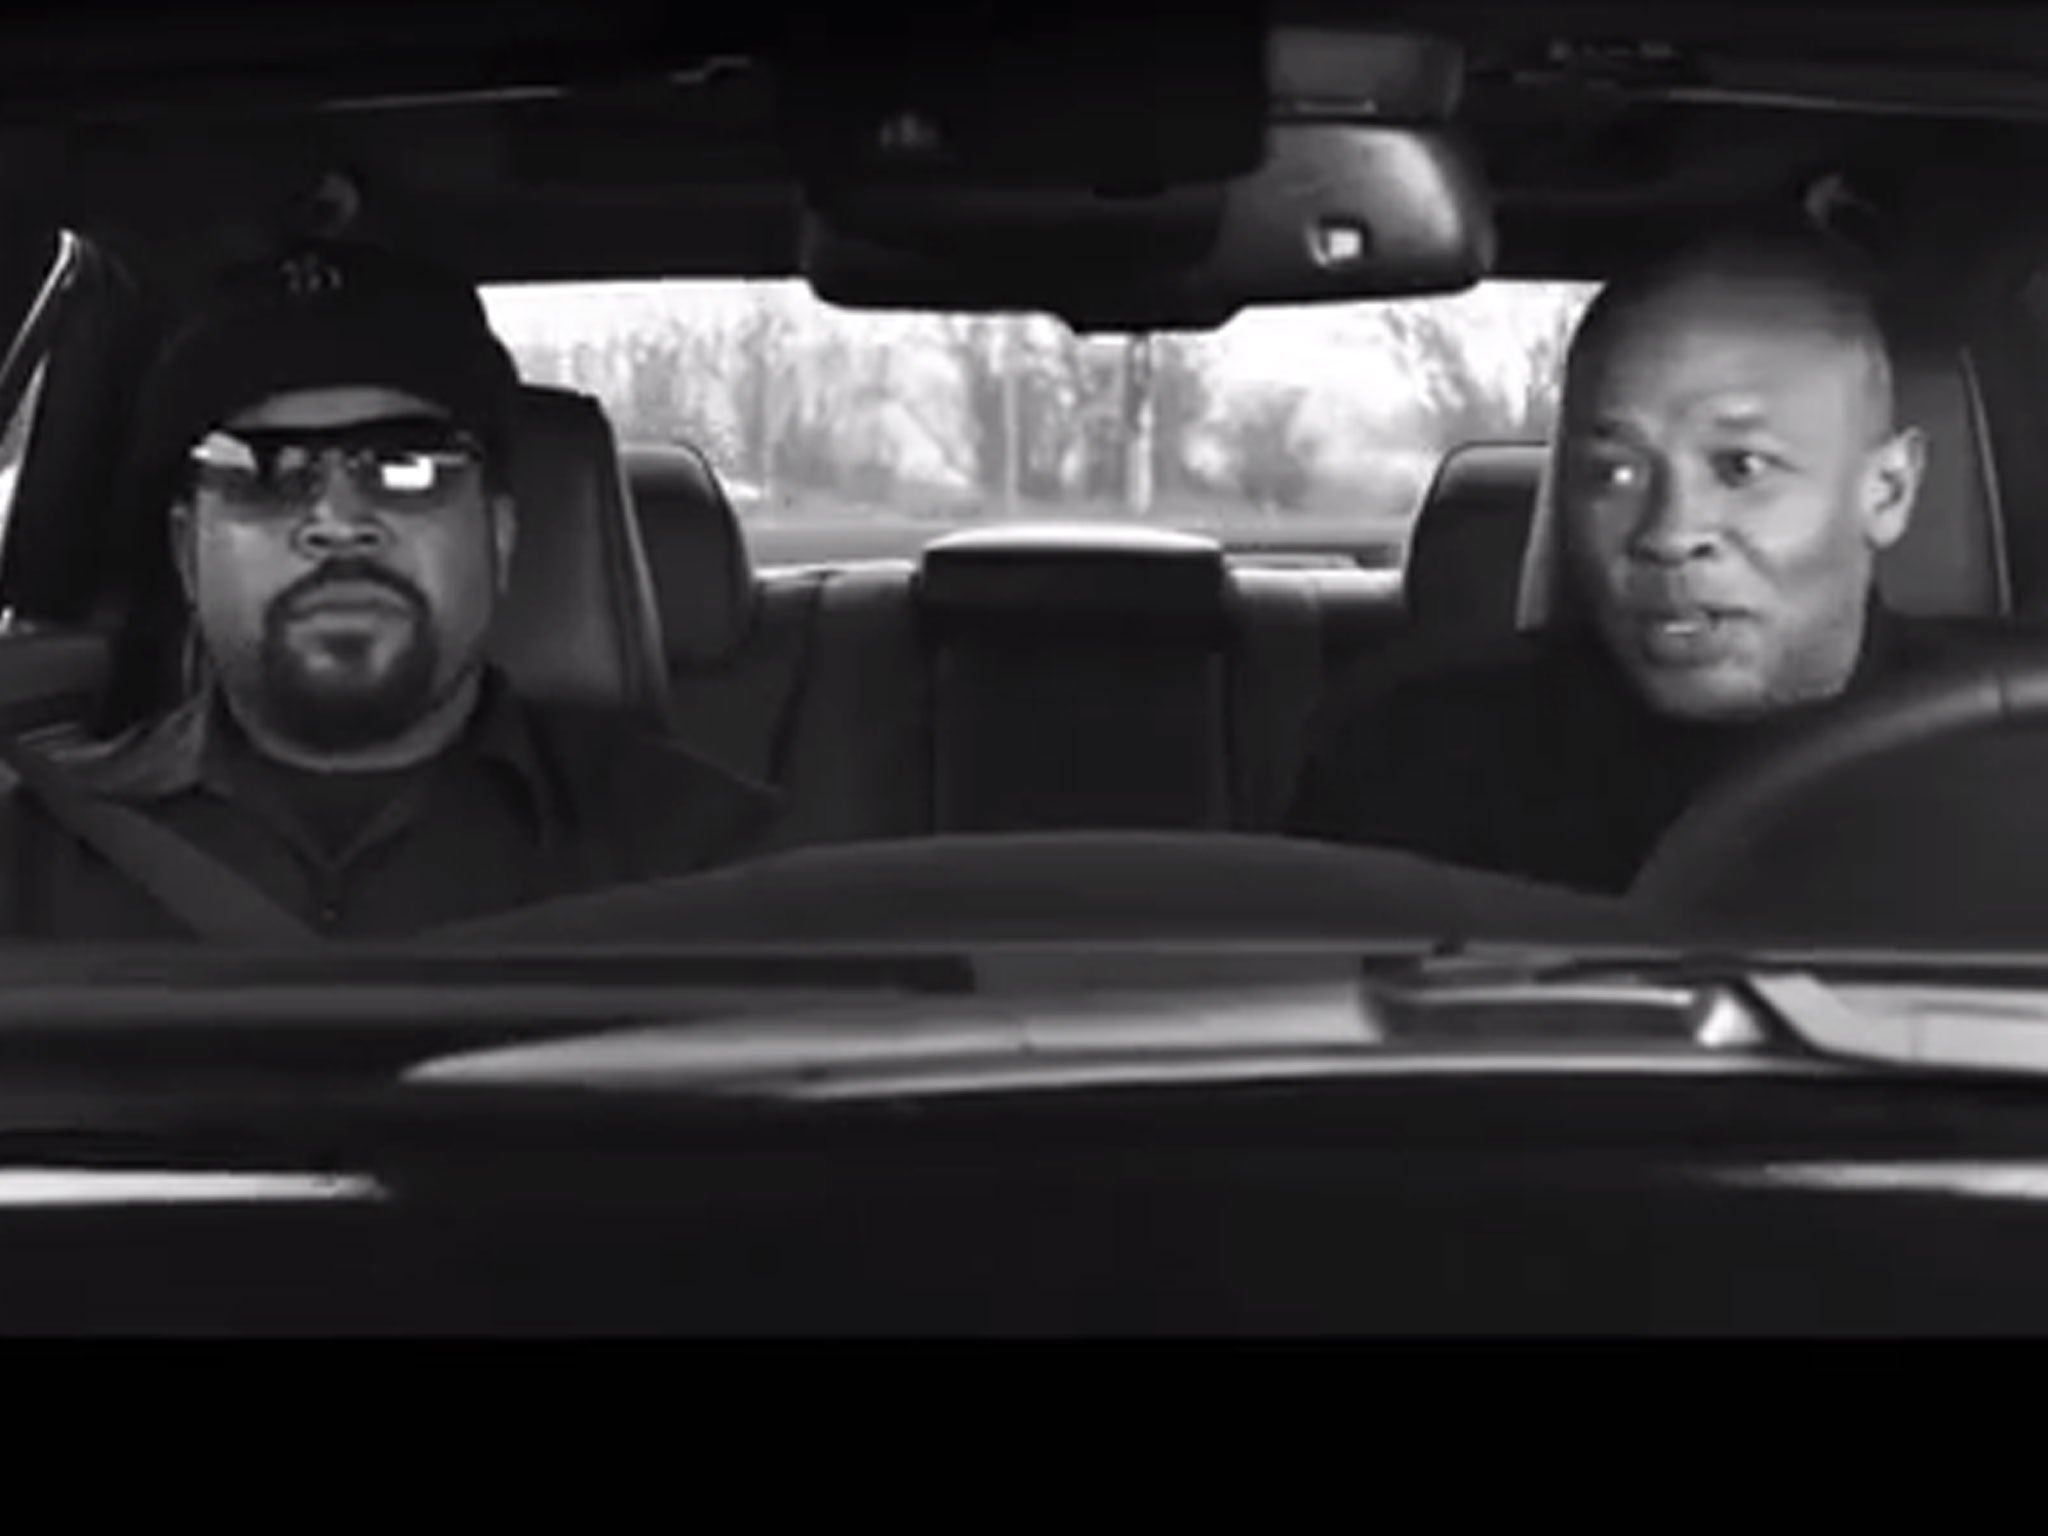 Dr Dre and Ice Cube seen at the start of the trailer